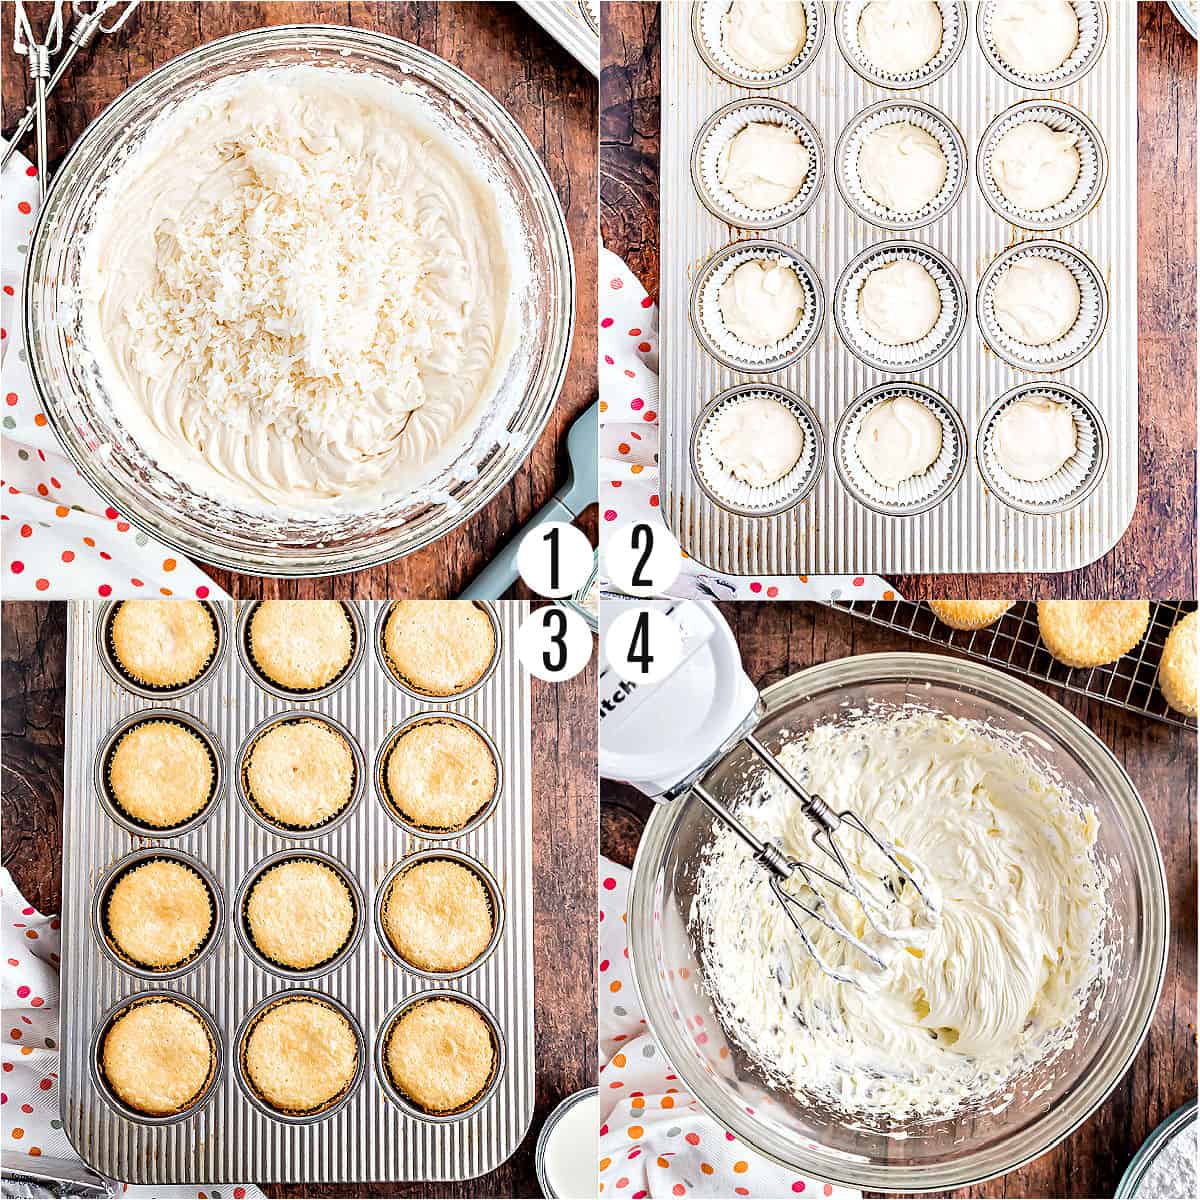 Step by step photos showing how to make coconut cupcakes.